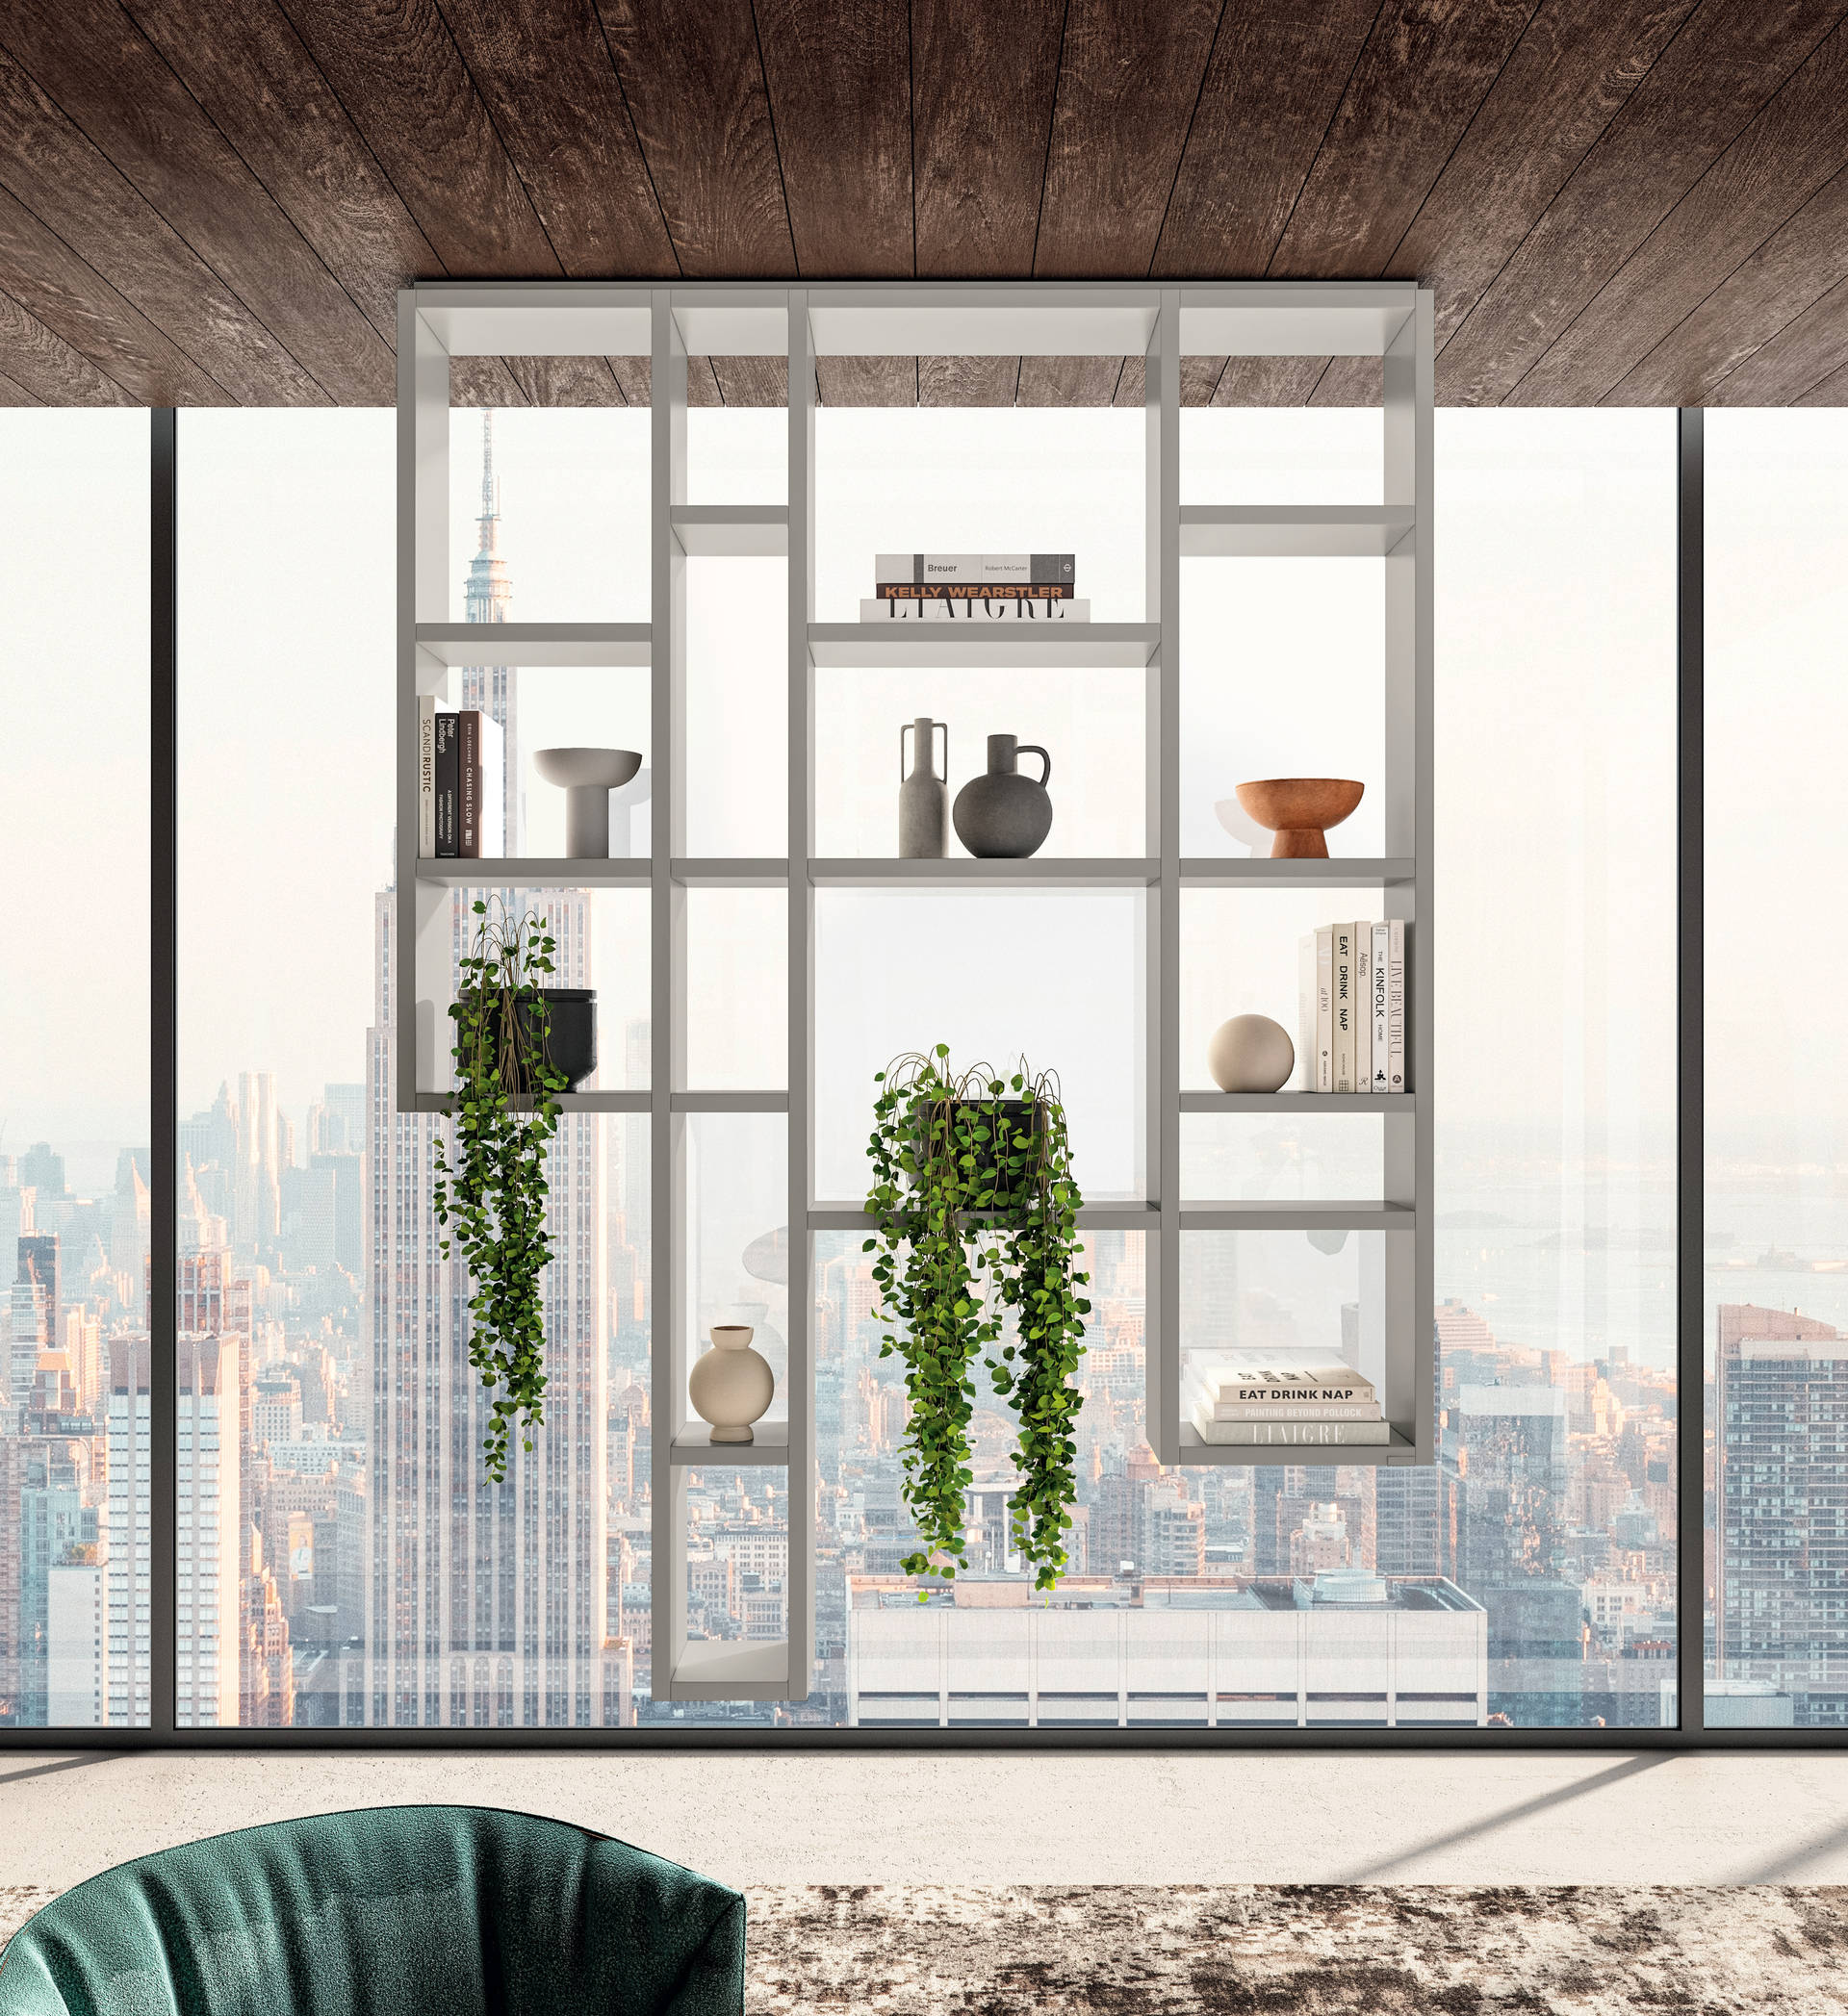 30 mm Weightless Shelving: magical suspension